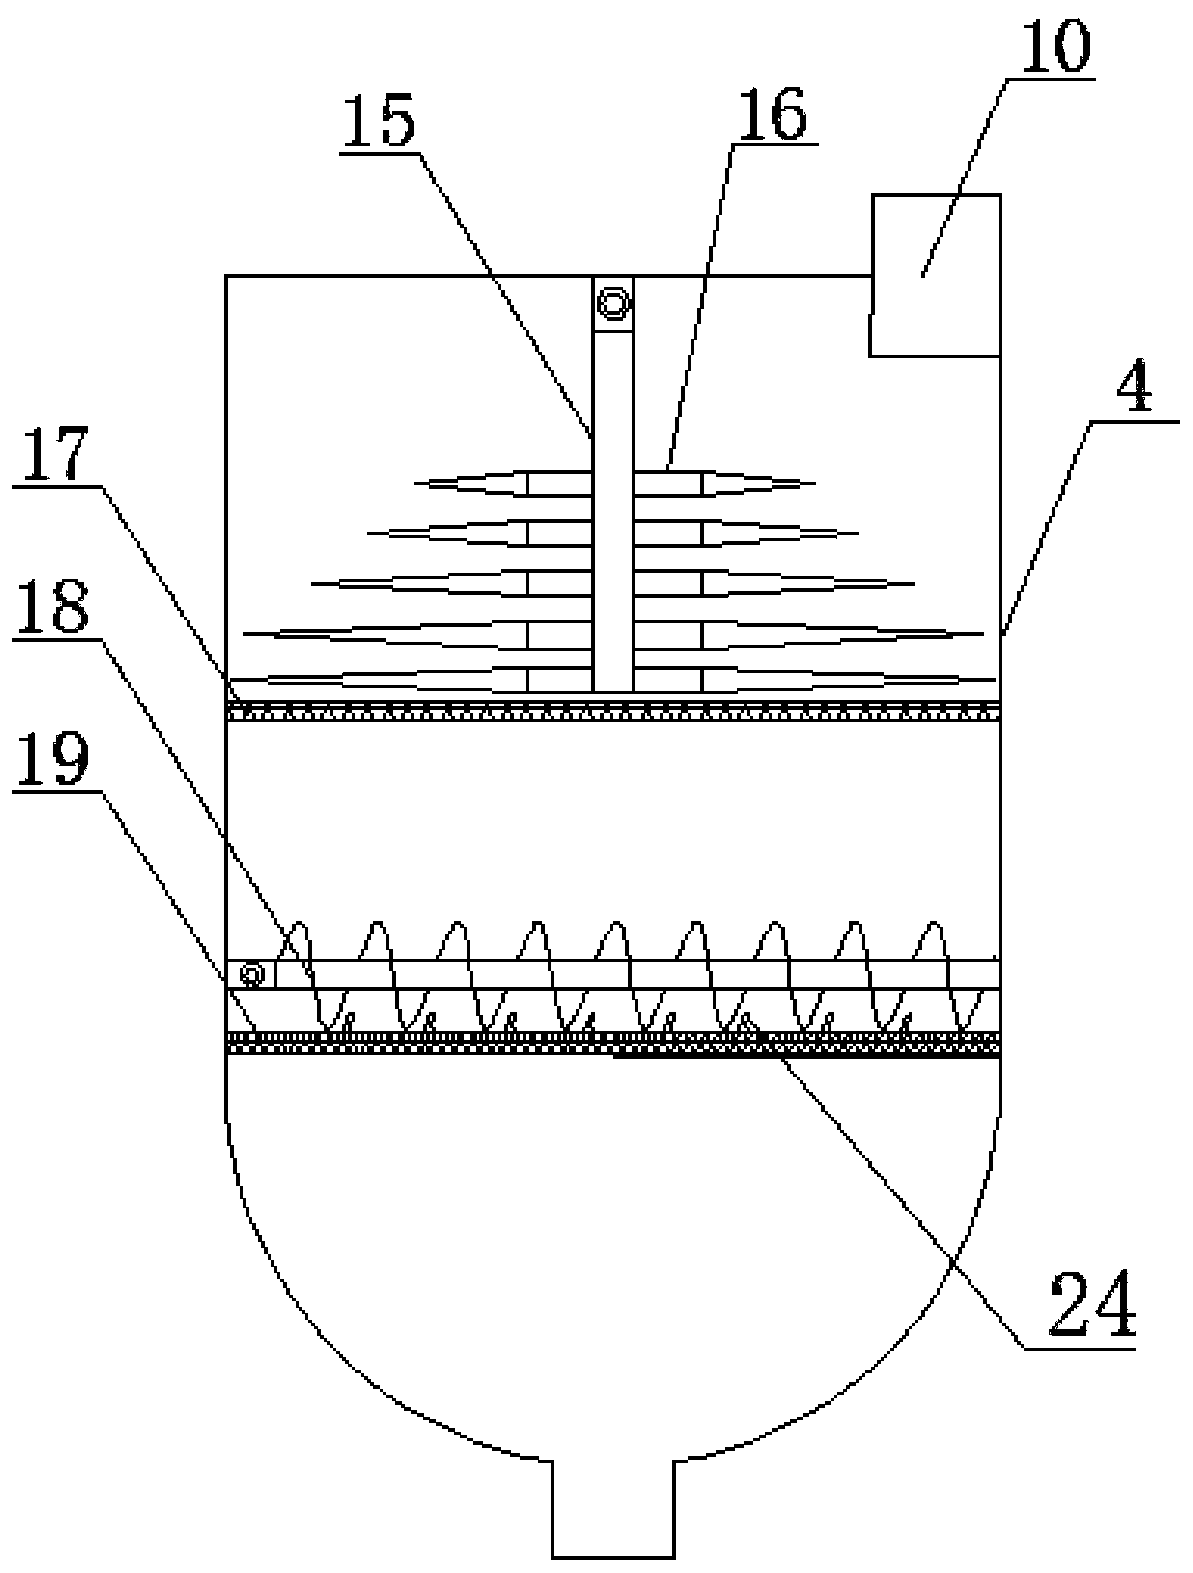 Material smashing and stirring device with abnormal smell treatment function based on organic fertilizer processing